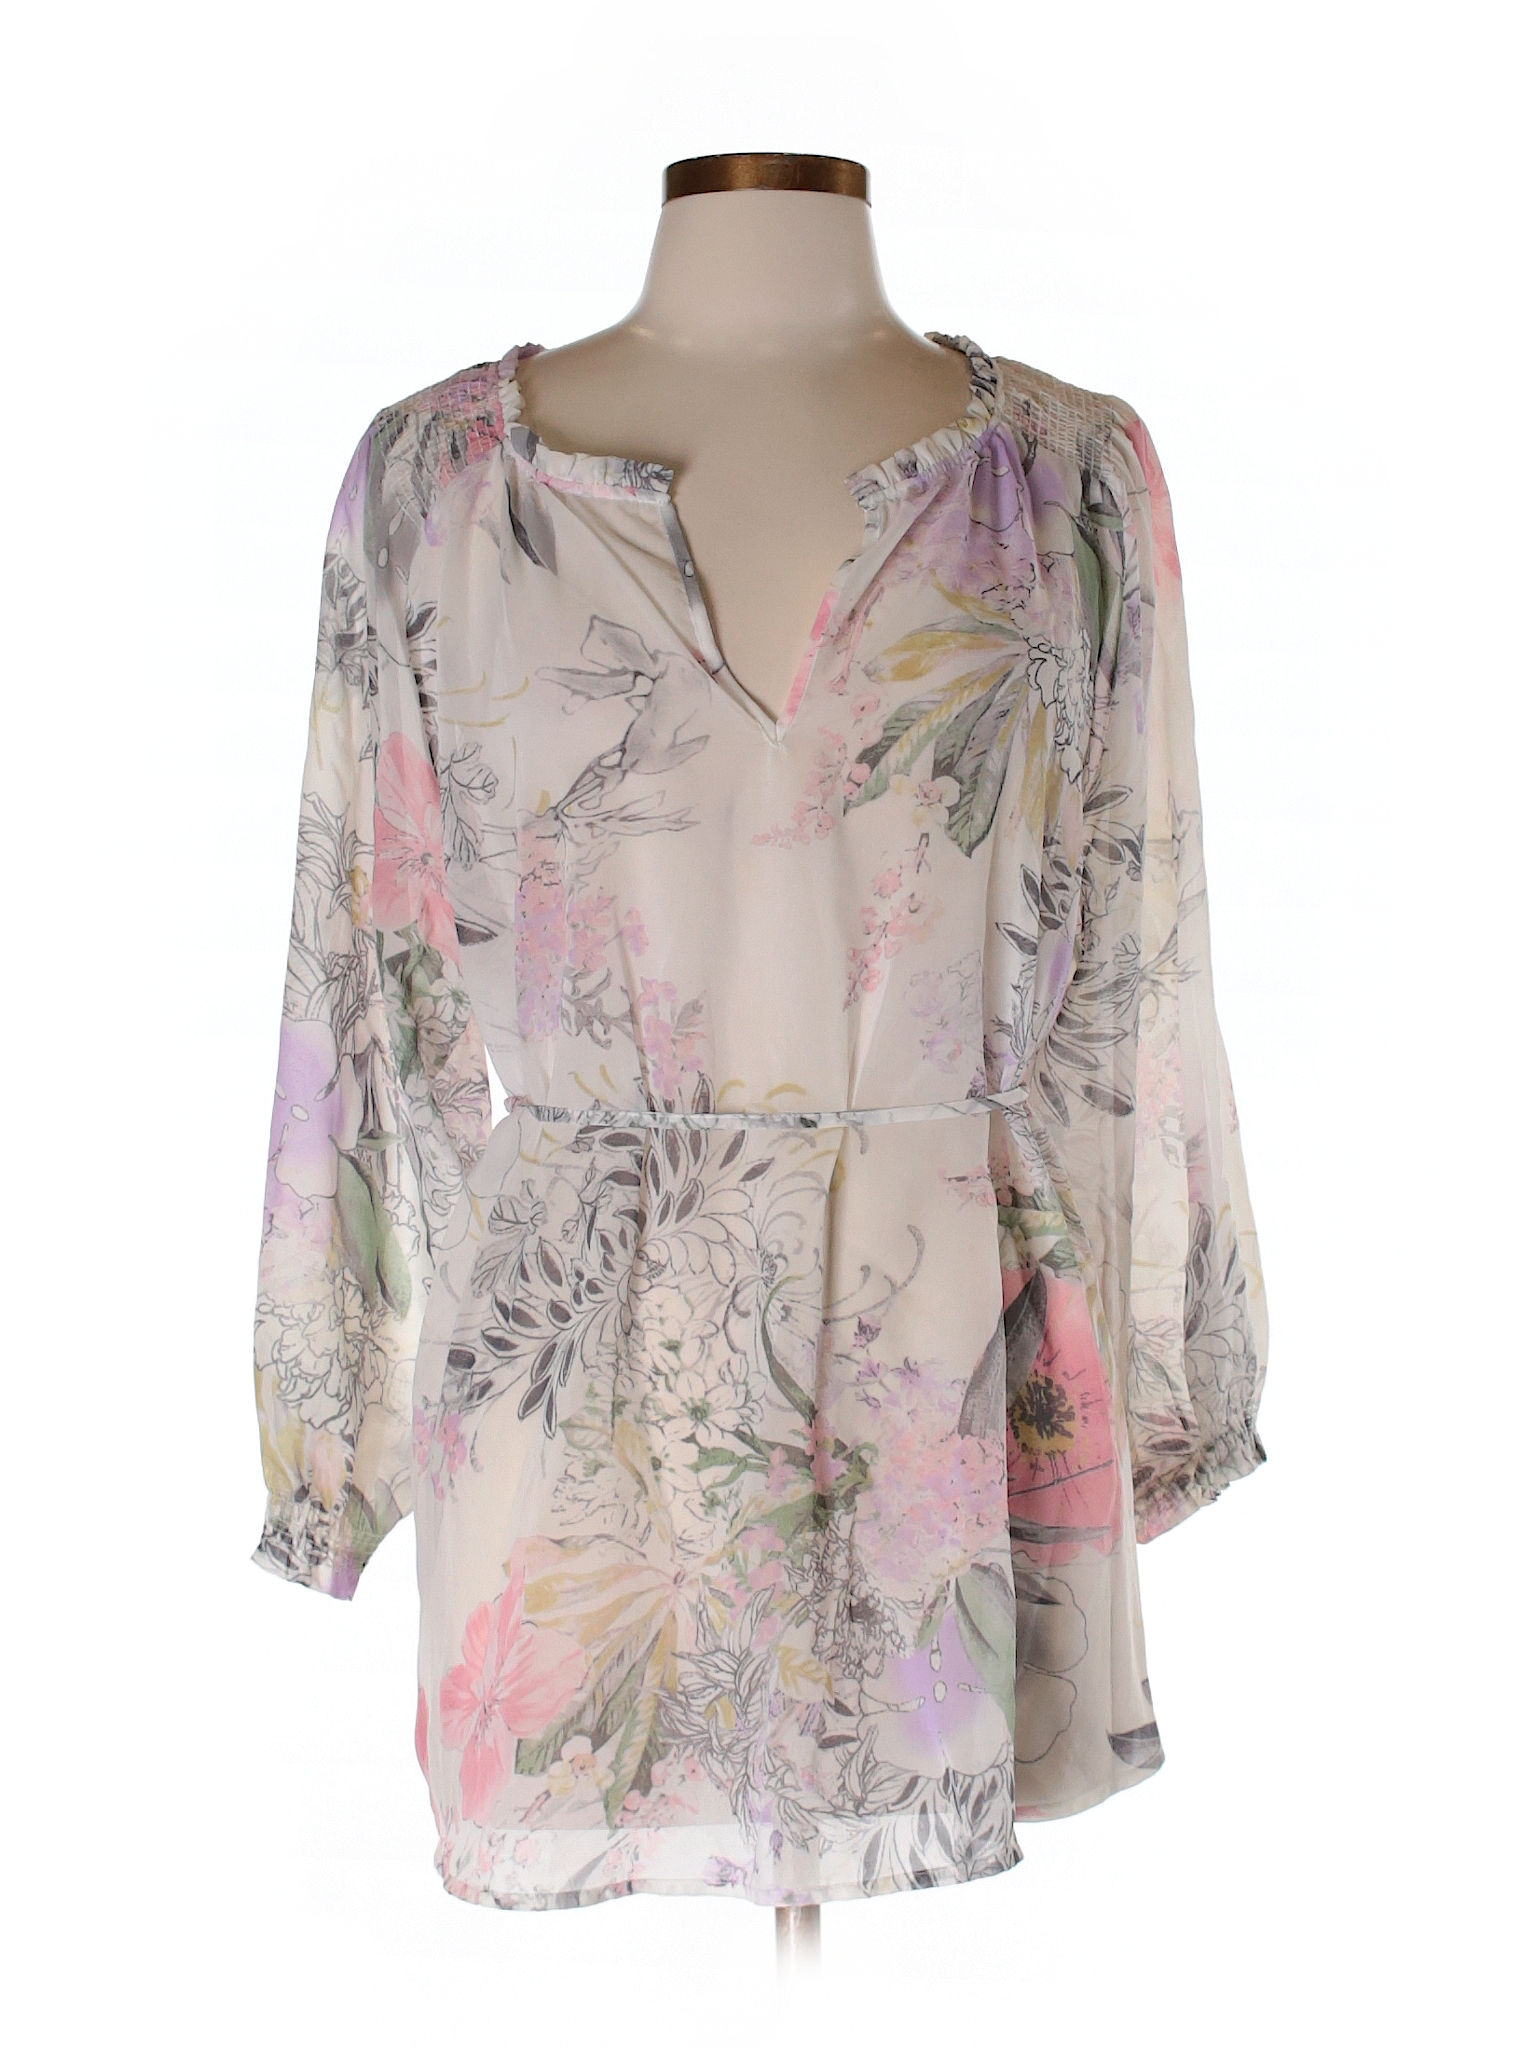 Jessica Simpson 100% Polyester Floral Light Pink Long Sleeve Blouse ...